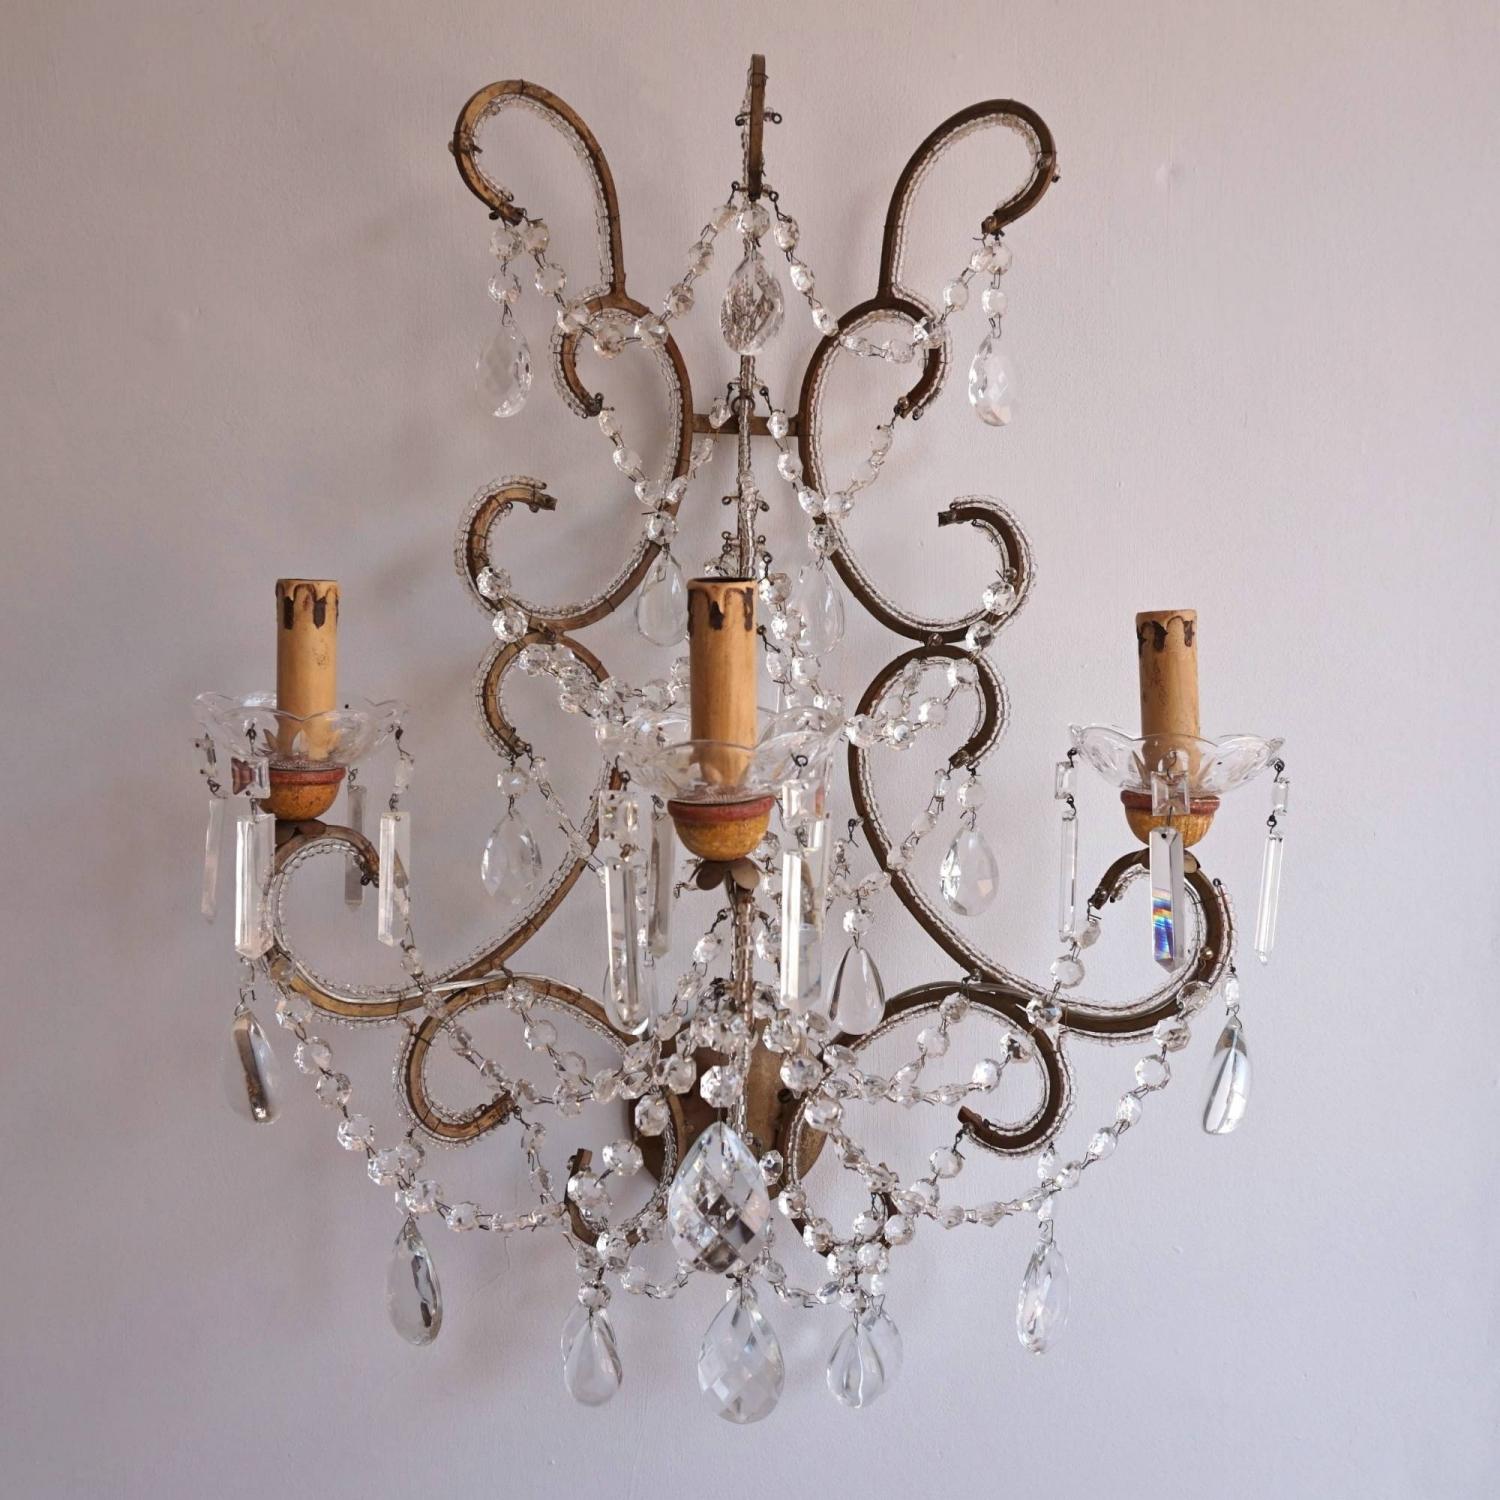 EXCEPTIONAL PAIR OF ITALIAN WALL SCONCES